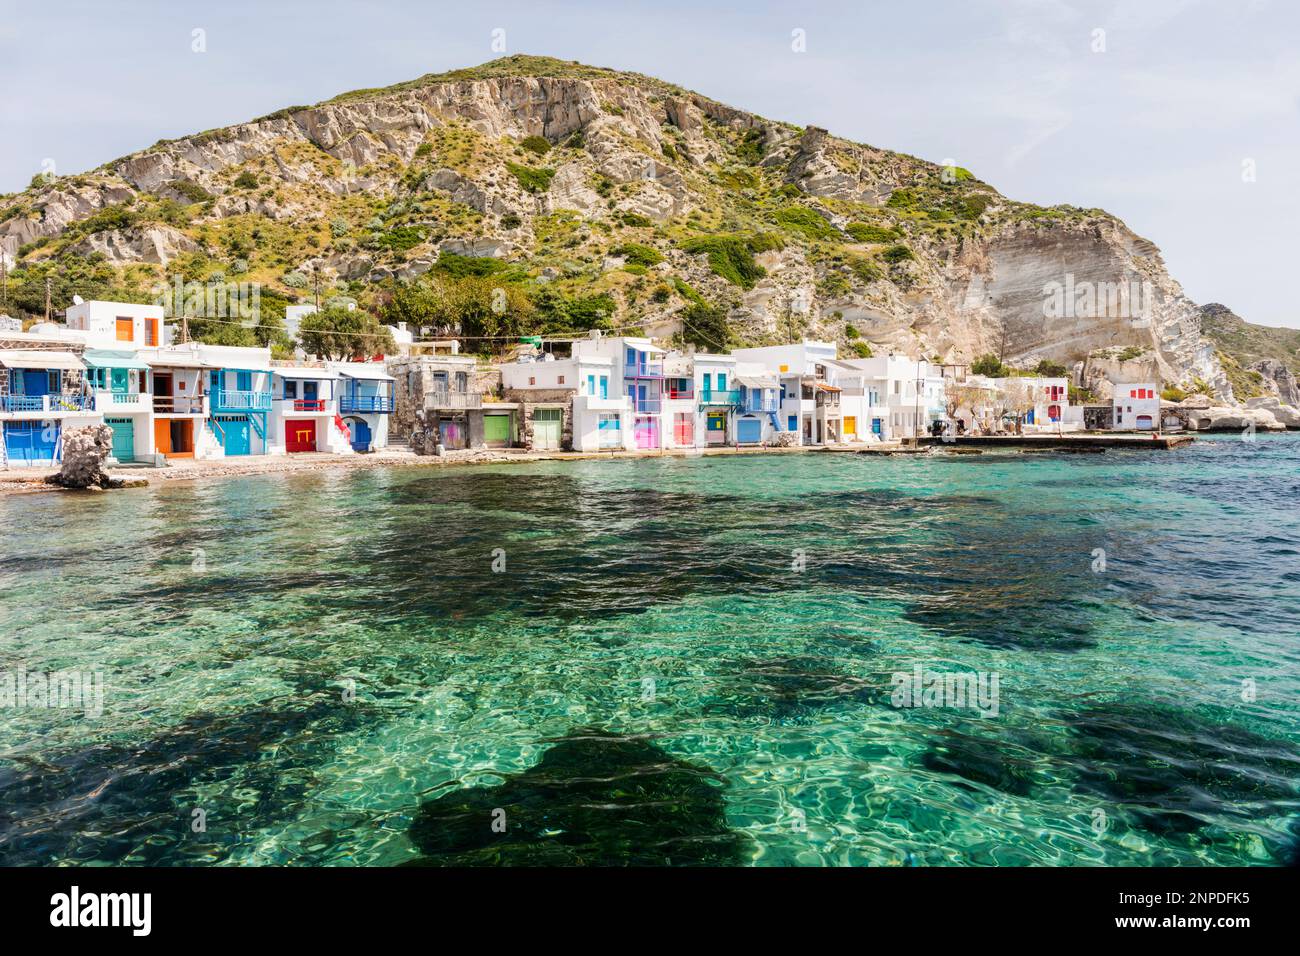 The traditional fishing village architecture by the sea at Klima in Milos. Stock Photo